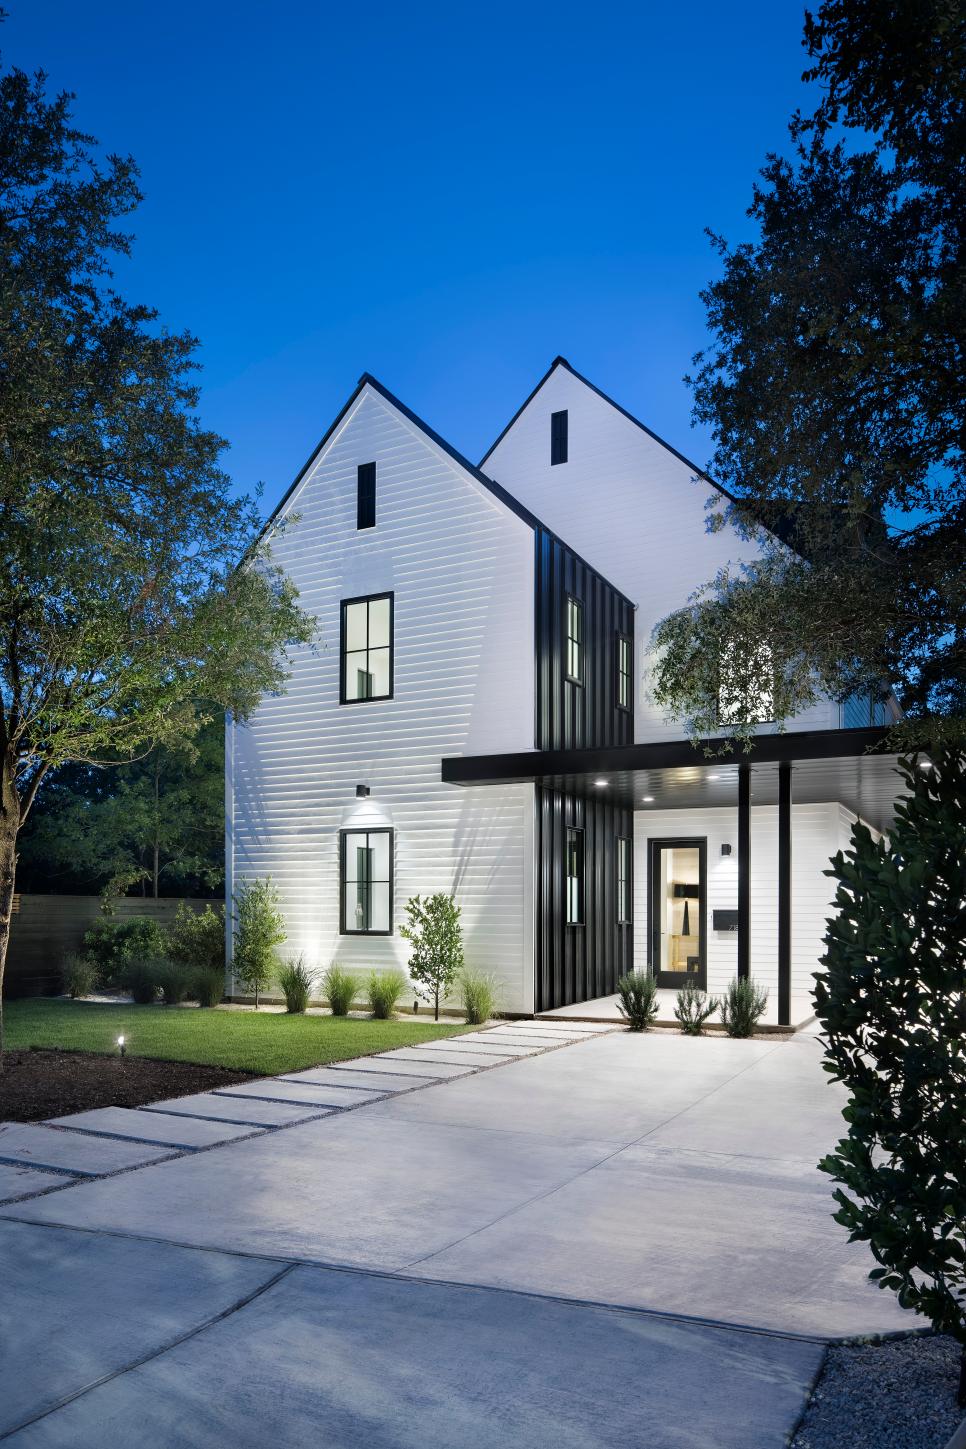 Modern White Farmhouse Exterior With Dormer Roof And Black Metal Accent